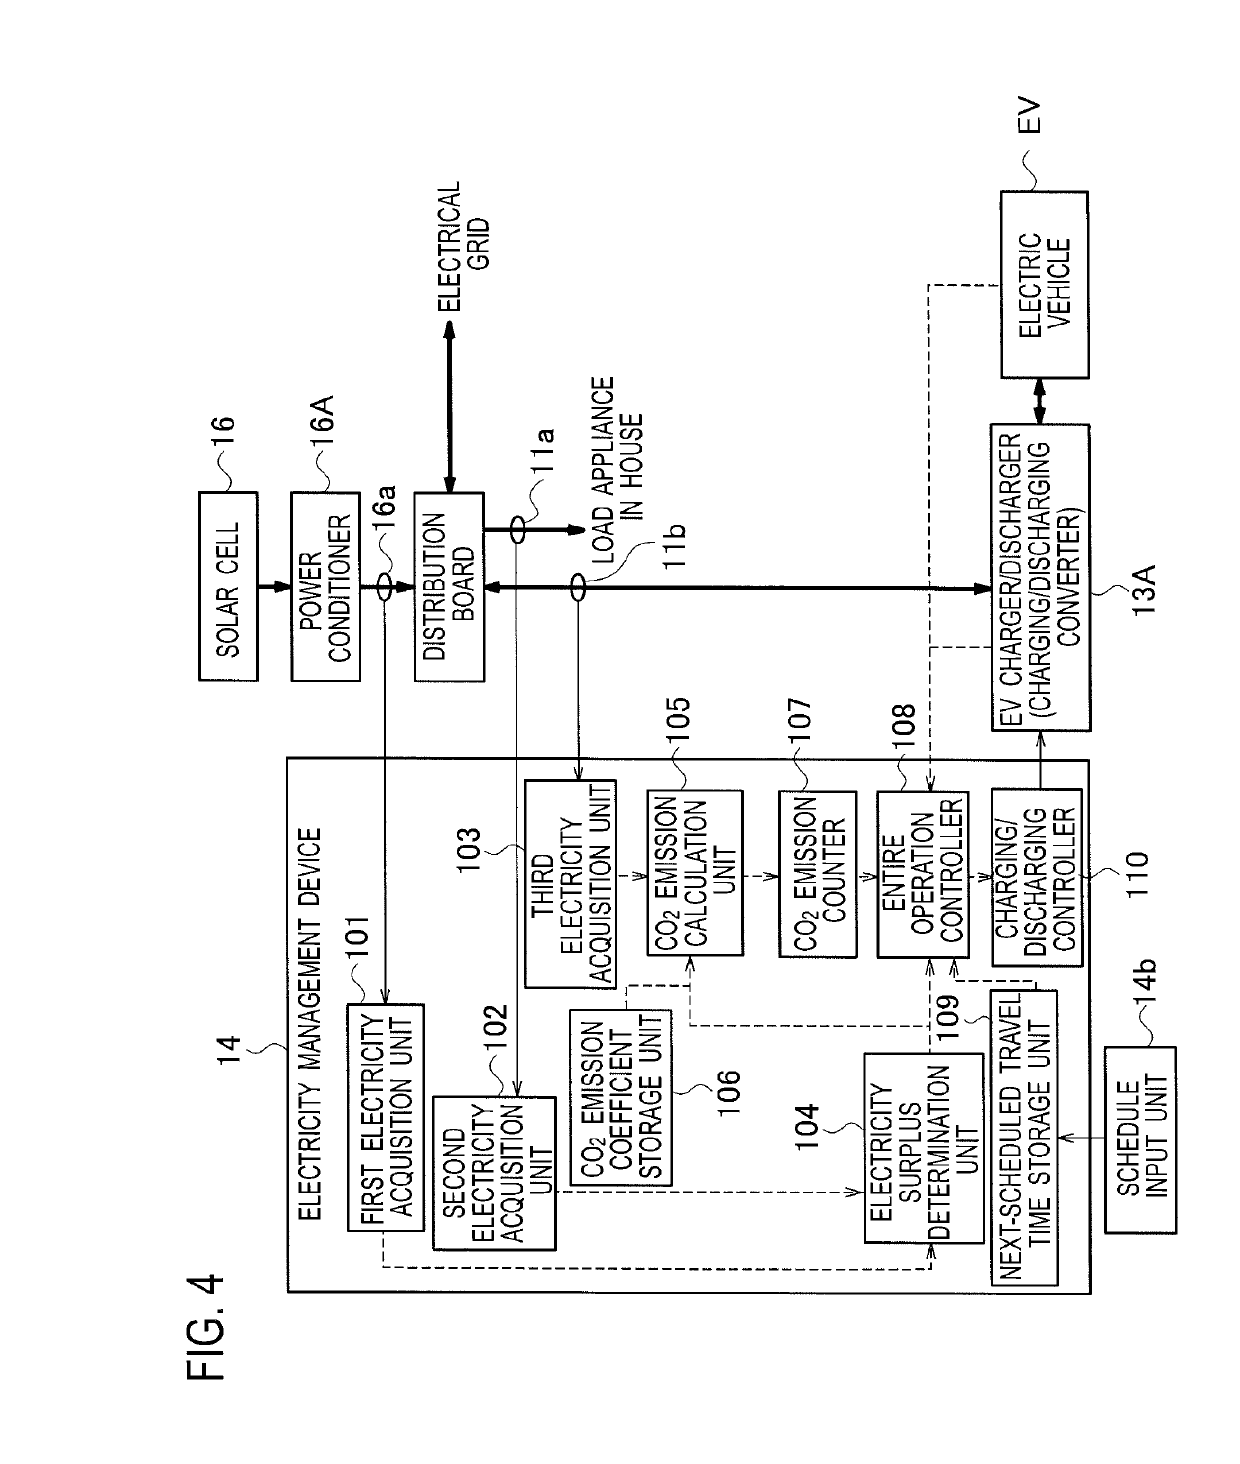 Electricity management device, electricity management method, and electricity distribution system inside a house with electricity generating device, utility grid connection, and electric vehicle containing a rechargeable battery in a vehicle-to-grid connection with counter device